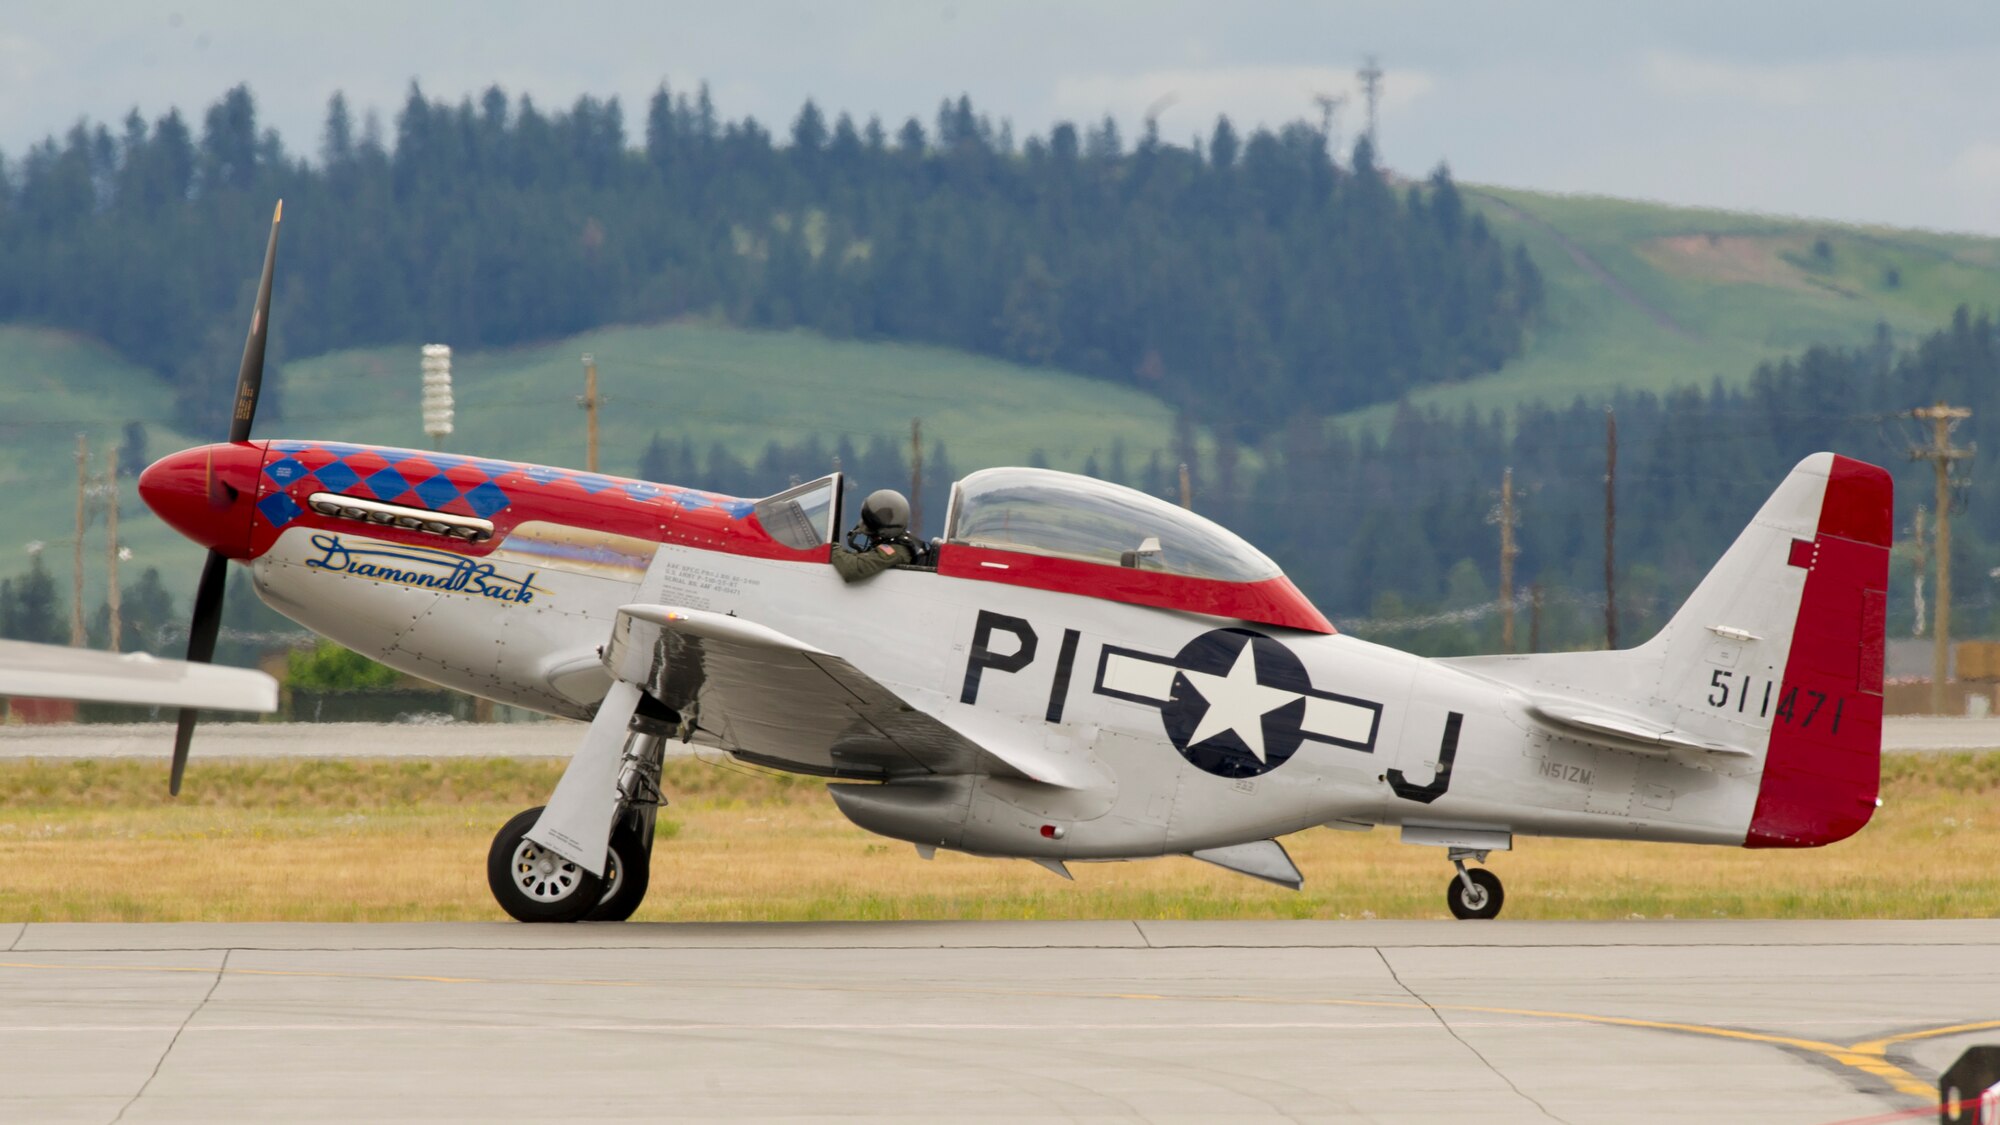 A P-51 Mustang prepares for take-off during the 2019 Skyfest Air Show and Open House opening ceremony at Fairchild Air Force Base, Washington, June 22, 2019. Fairchild opened its gates to the public for a free one-day event to showcase Pacific Northwest airpower and U.S. Air Force capabilities. The airshow included the F-22 Demonstration Team, U.S. Army Golden Knights and 11 other aerial acts. (U.S. Air Force photo by Senior Airman Ryan Lackey)